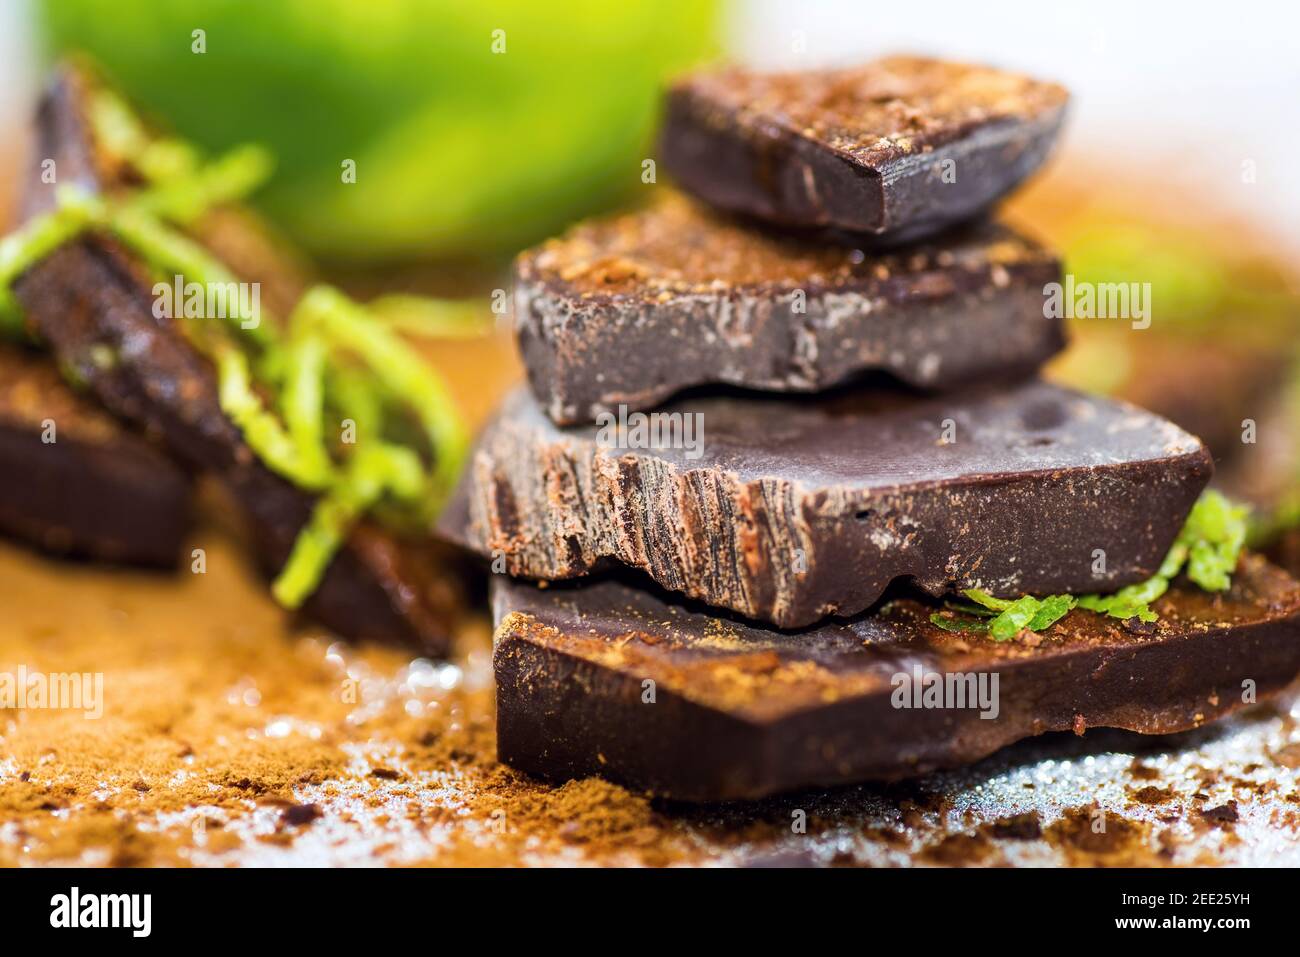 Broken pieces of chocolate sprinkled with cinnamon and lime peel, lime fruit on background. Stock Photo